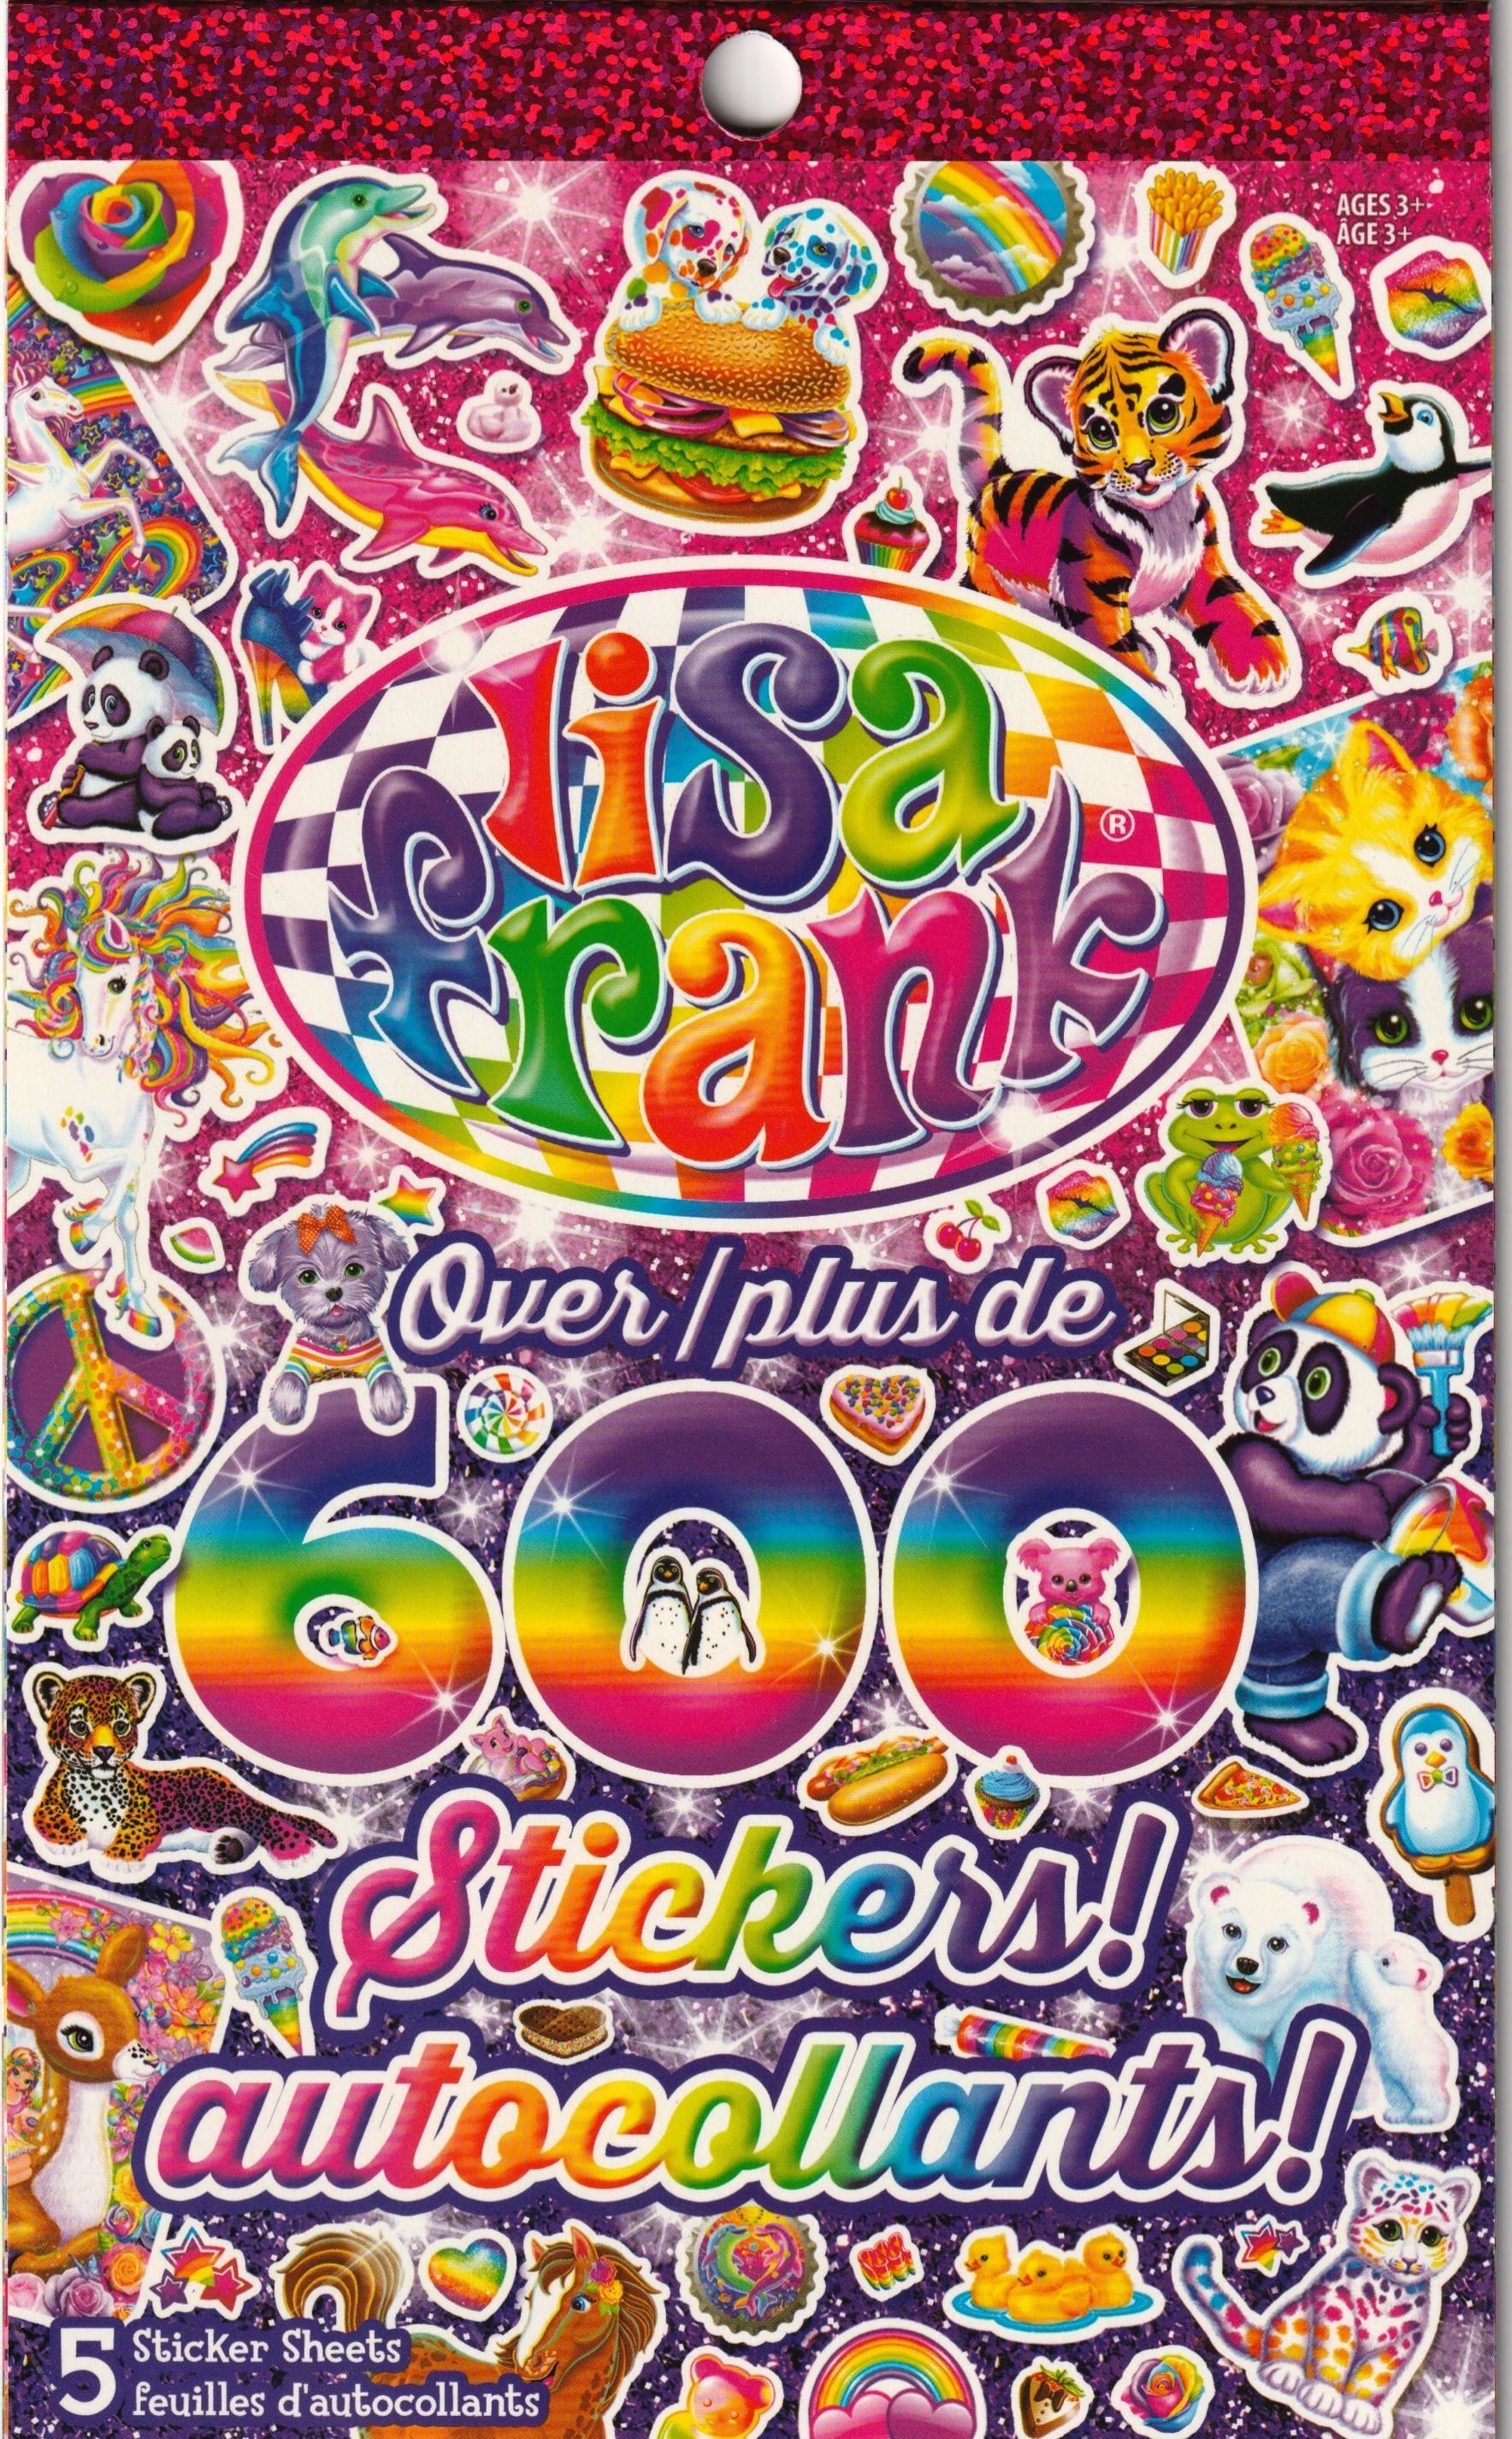 Lisa Frank Stickers - Brought so much colour to my childhood : r/nostalgia